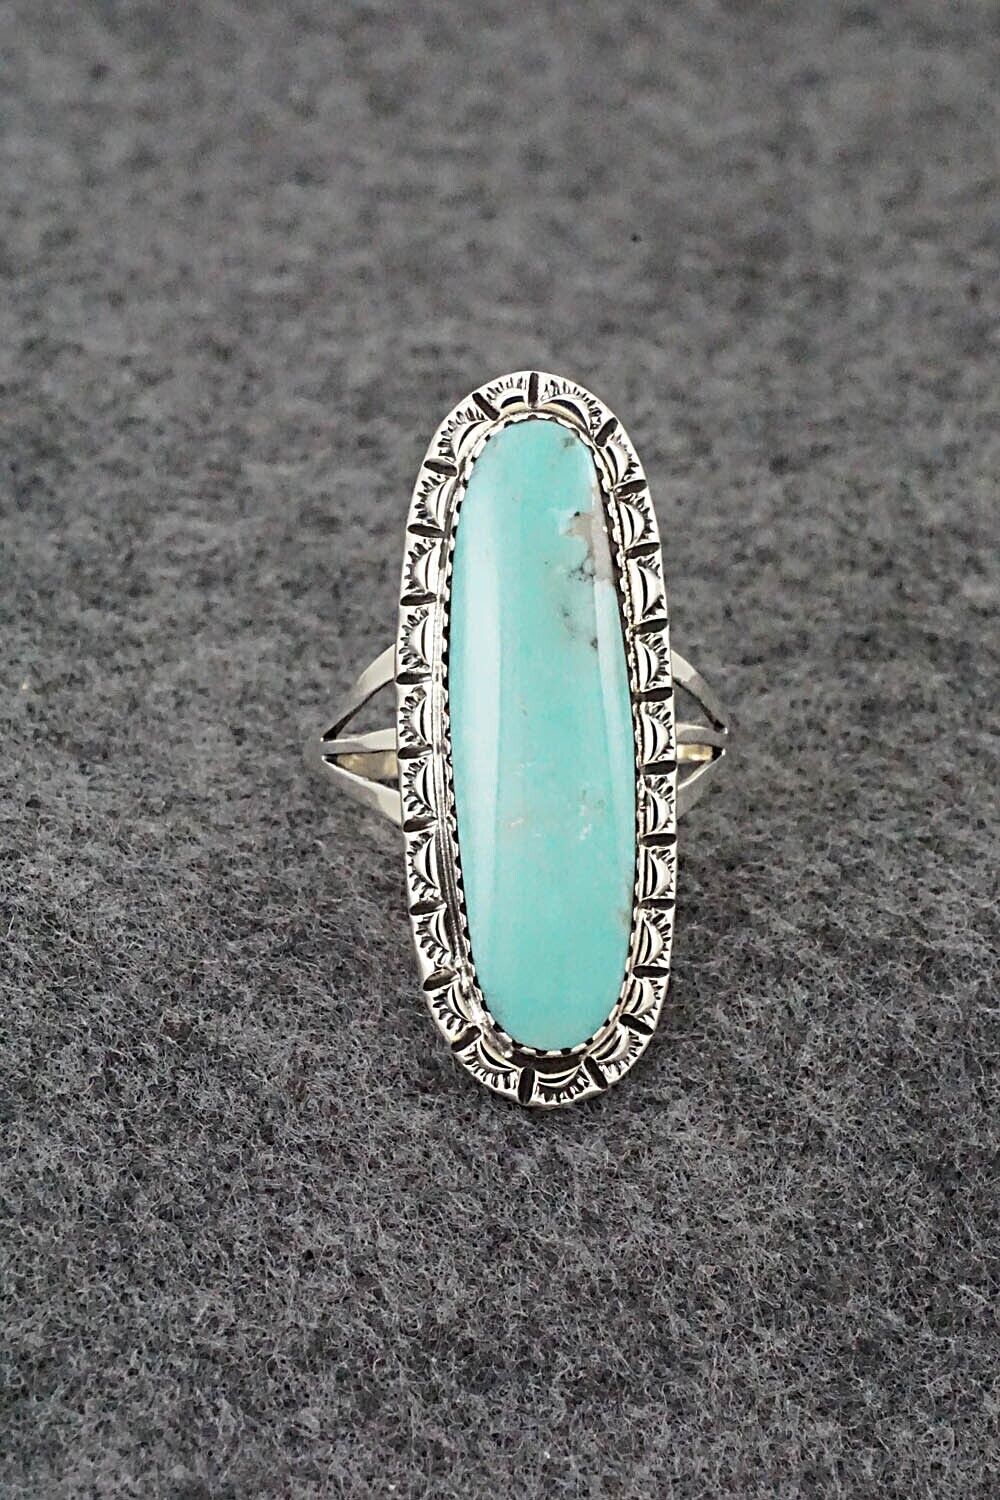 Turquoise & Sterling Silver Ring - Mike Smith - Size 10